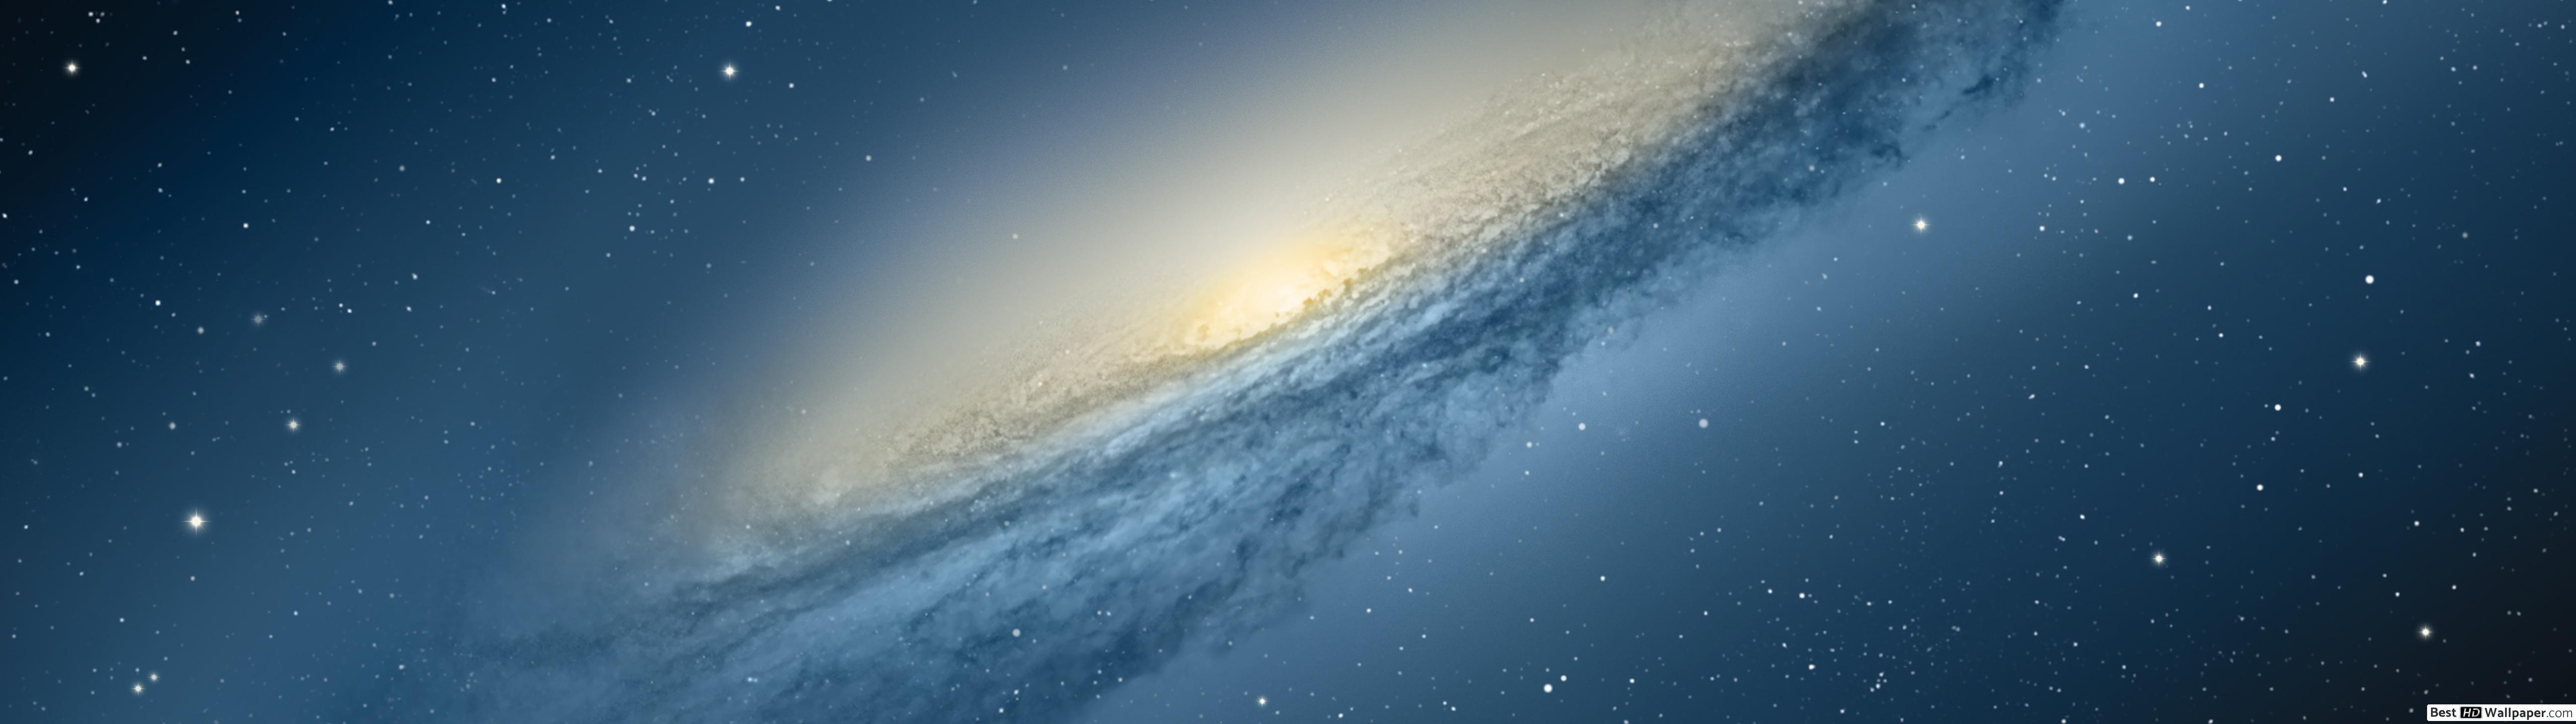 5120x1440 Space Wallpapers - Top Free 5120x1440 Space Backgrounds